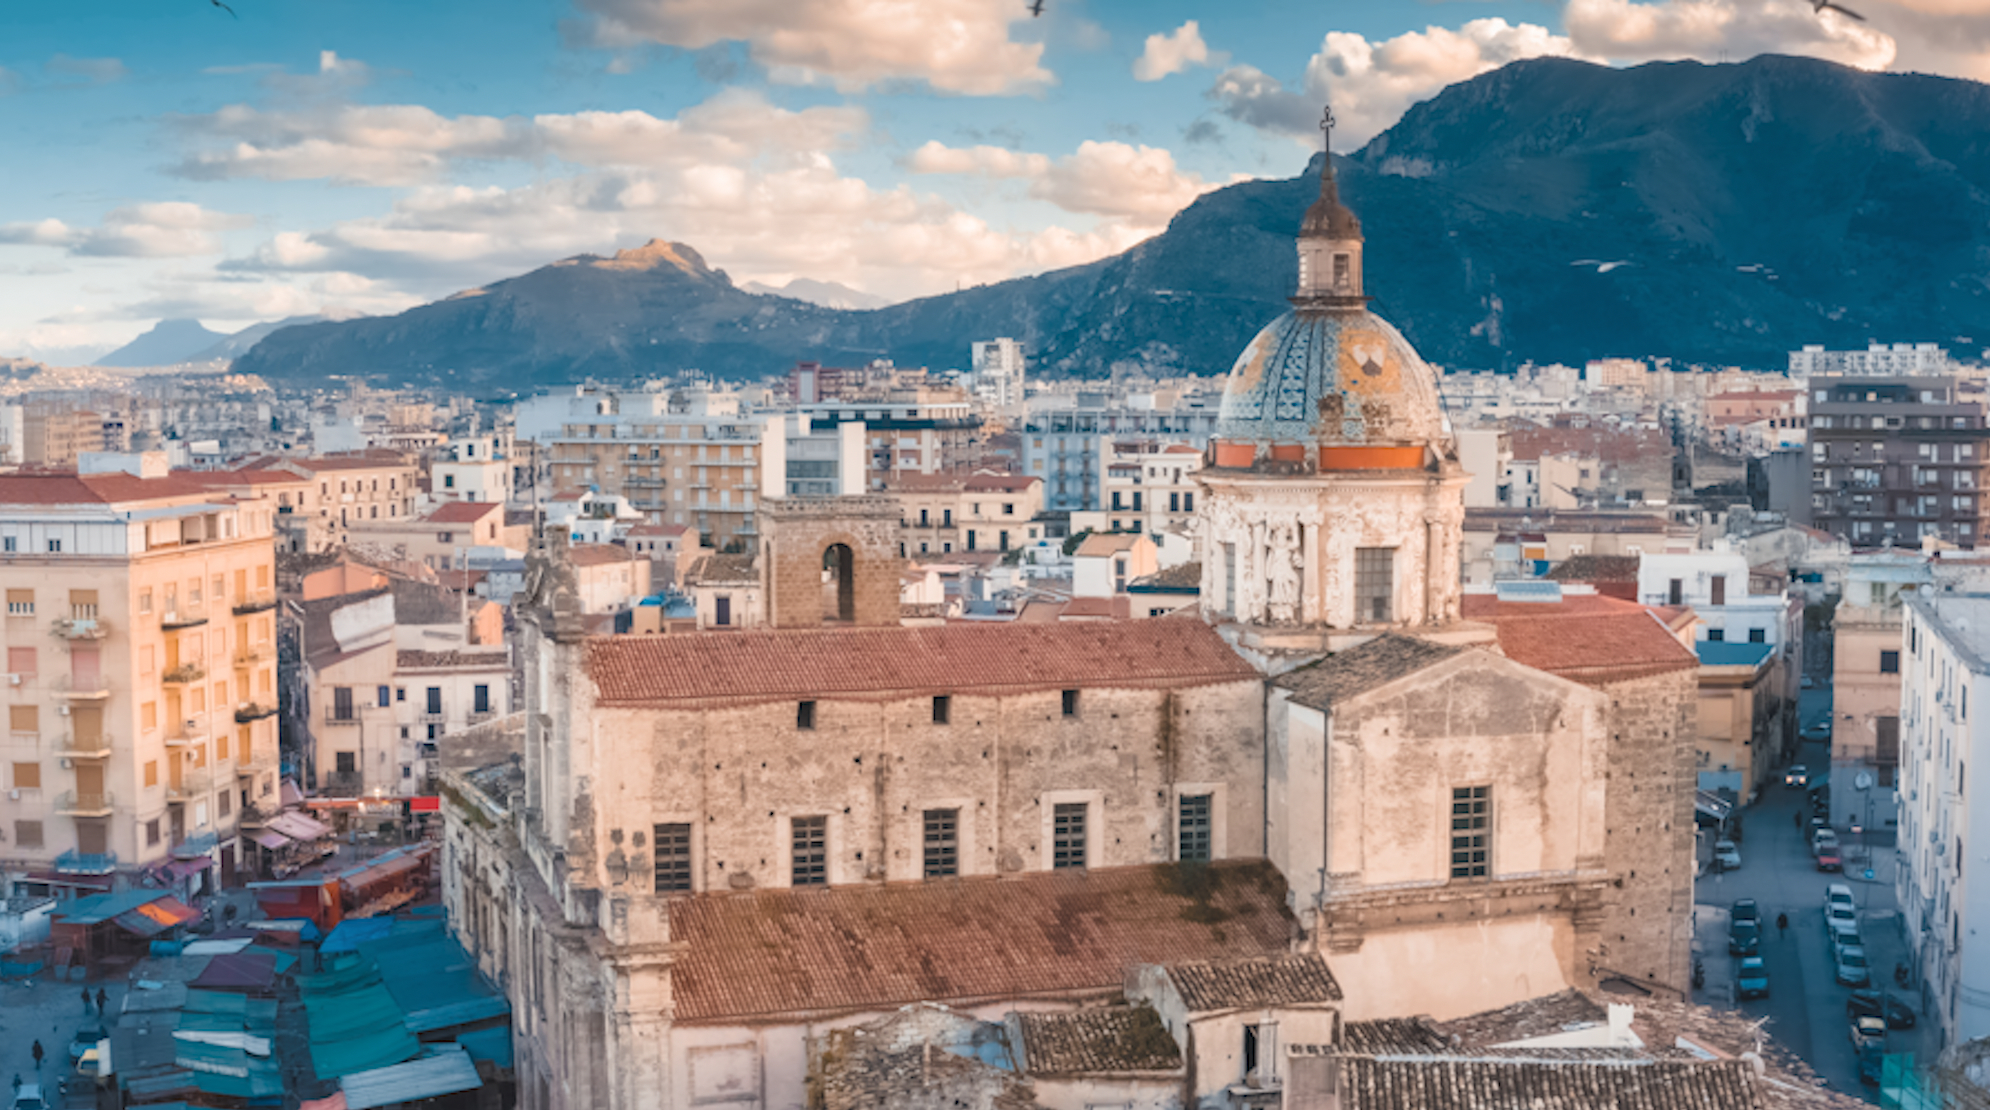 Cityscape of Palermo, the capital of Sicily, in Italy.